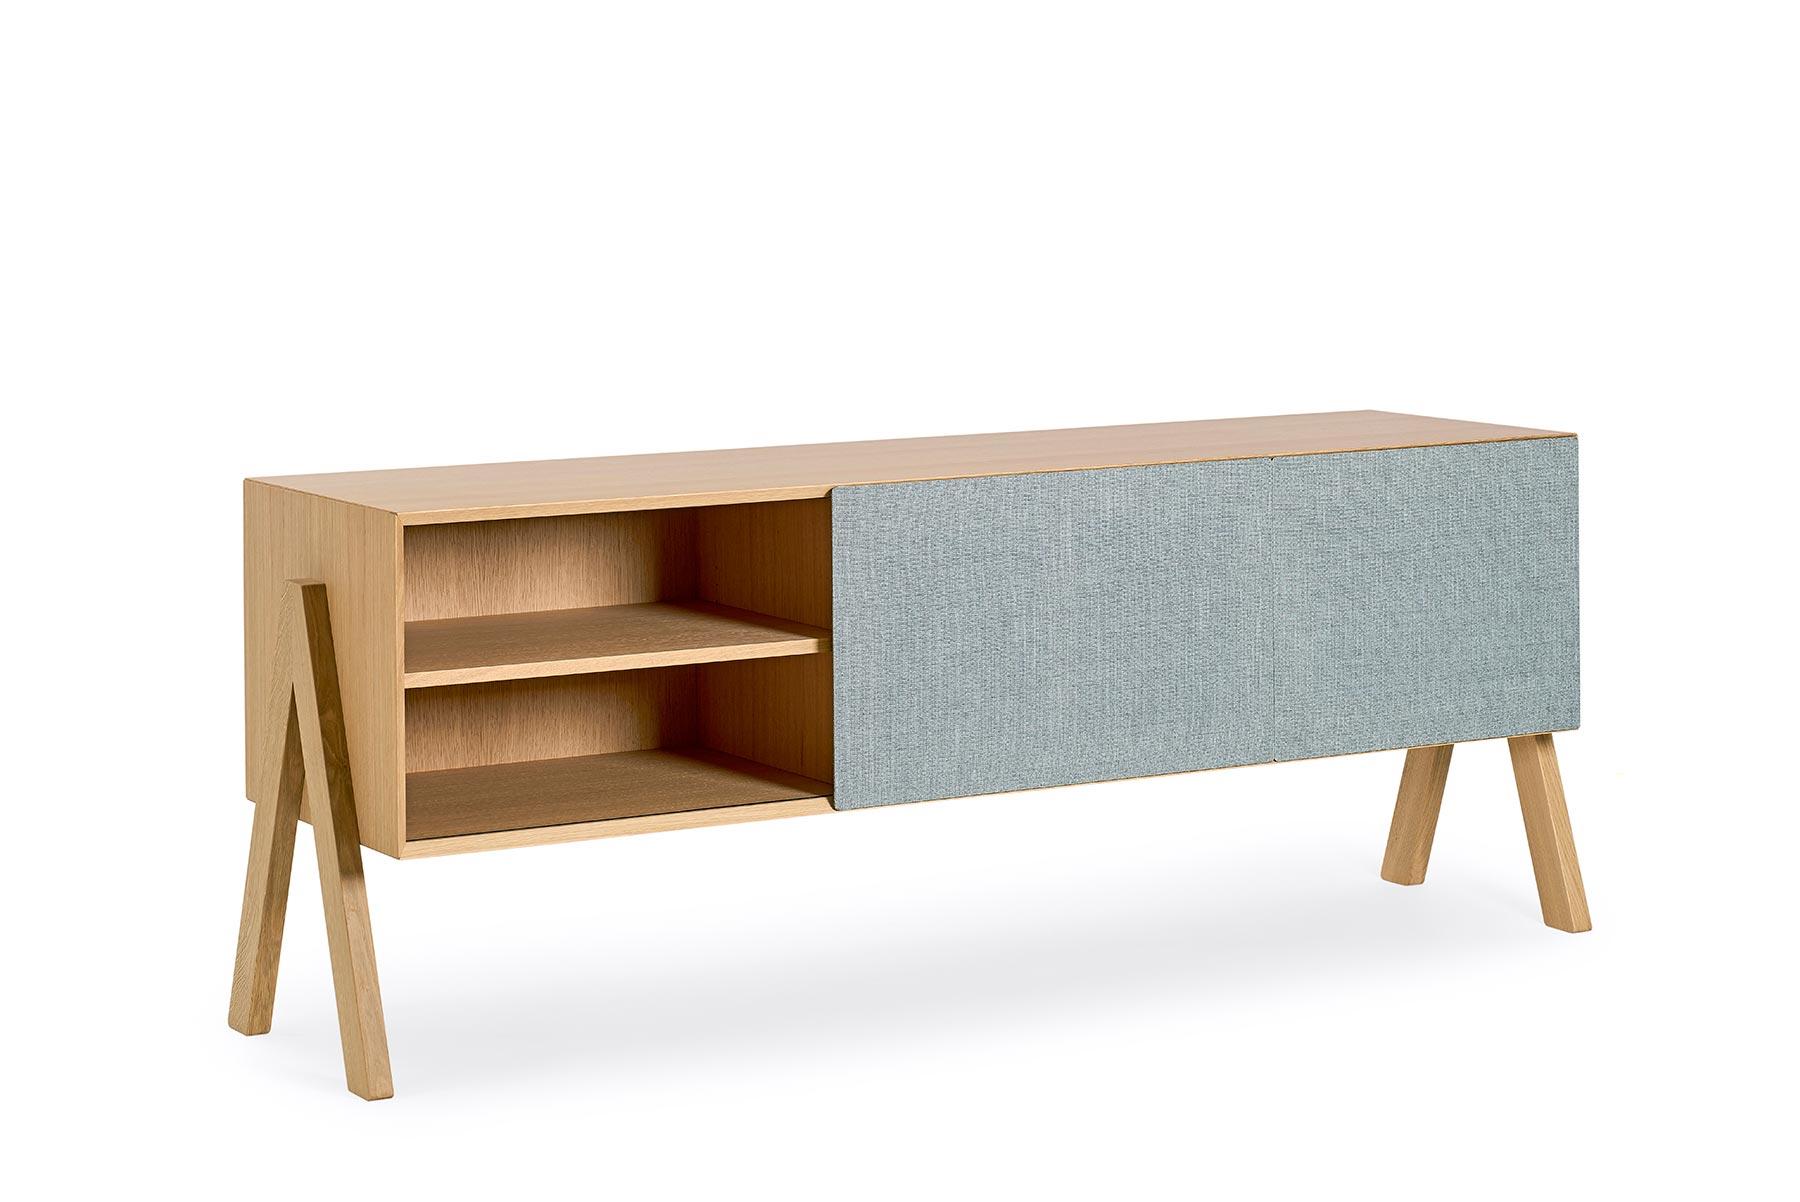 Designed by Friis and Moltke in 2017, this minimalist’s credenza features exterior mounted V- legs with a cloth cabinet door that slides from one bay to the next. Crafted in solid wood, this credenza is hand built at Getama’s factory in Gedsted,